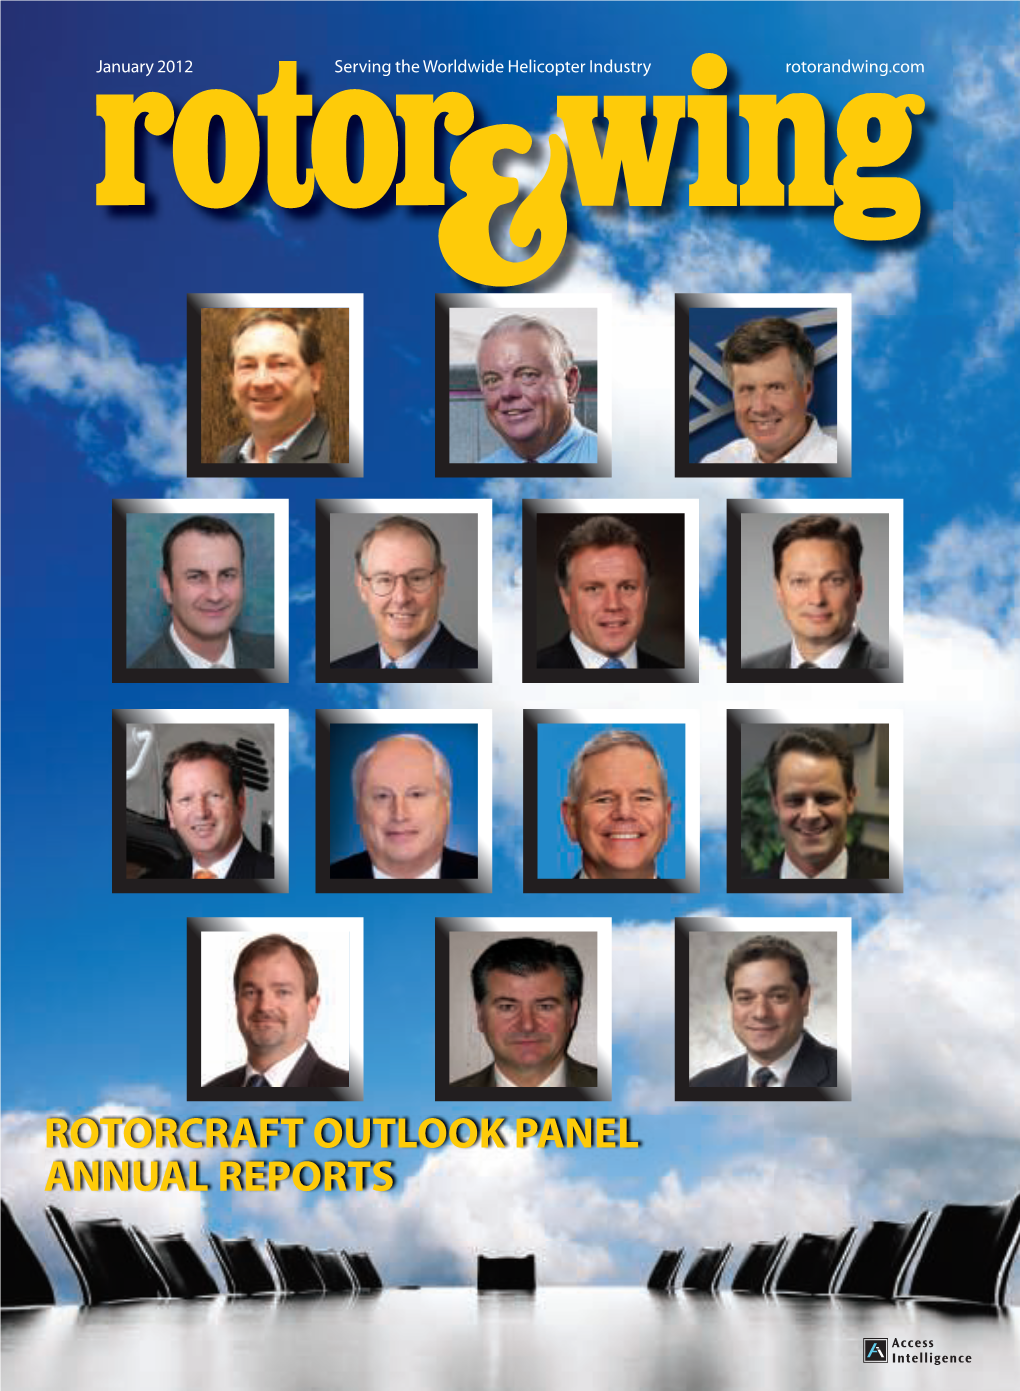 ROTORCRAFT OUTLOOK PANEL ANNUAL REPORTS Photo Courtesy U.S